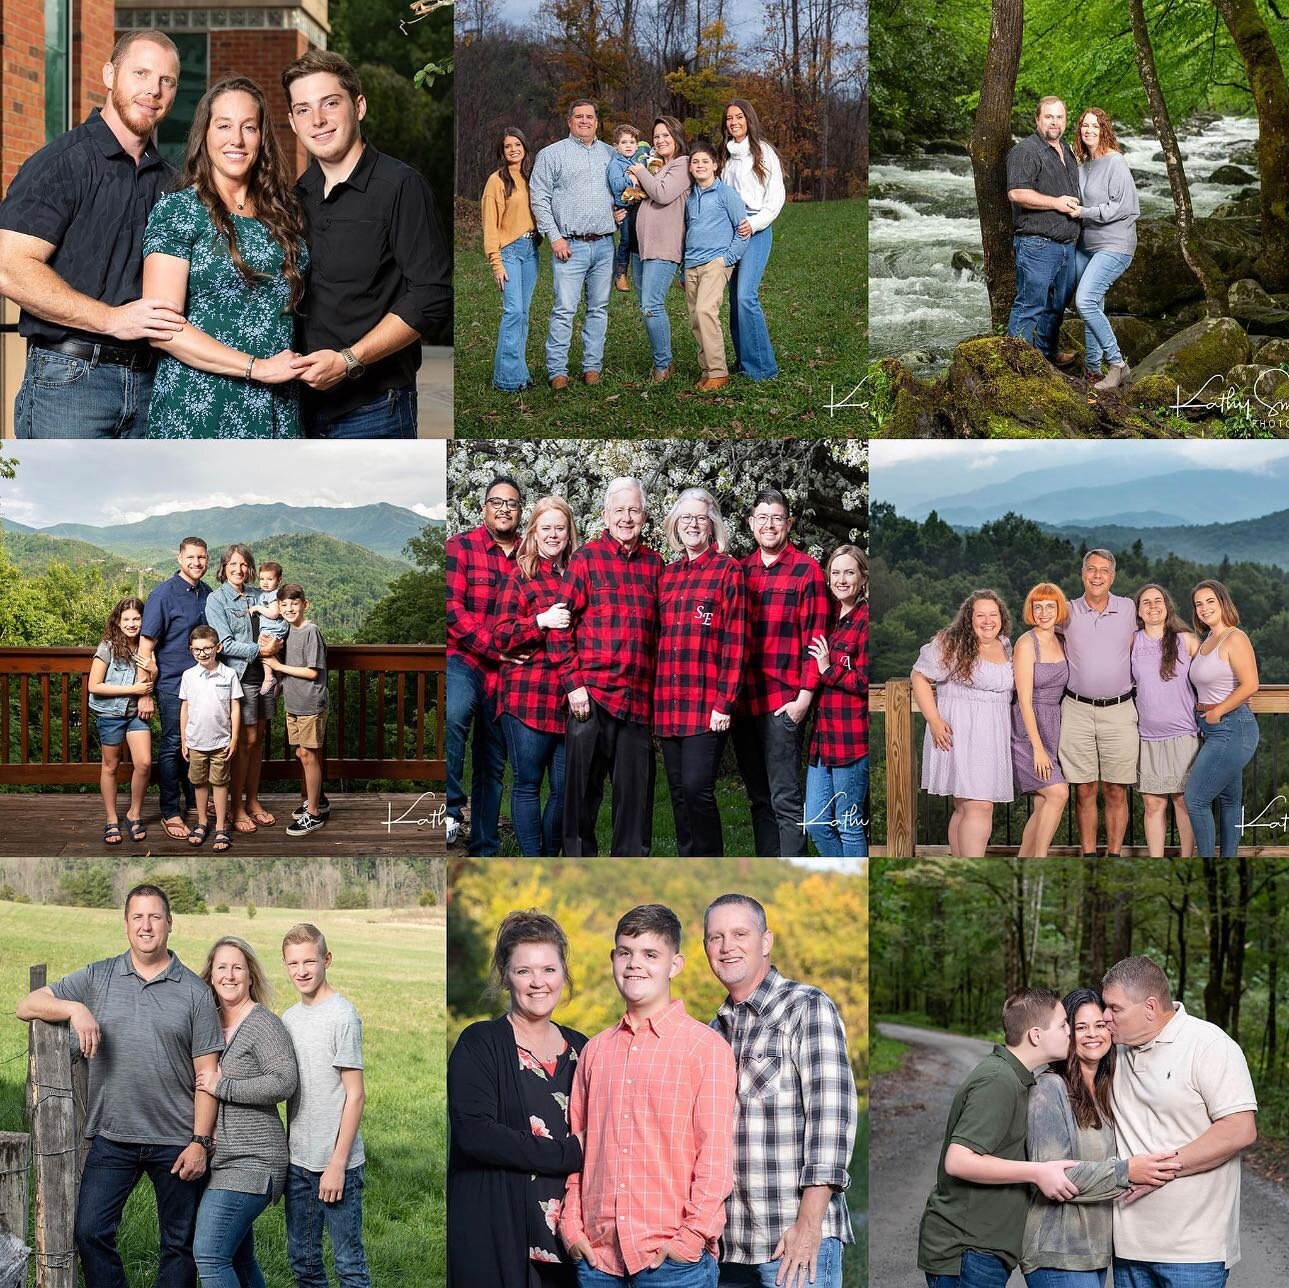 Plan ahead and book your family portrait session now for your next Smoky Mountain vacation. 
.
.
.
.
.
#familyphotography 
#smokymountainphotographer 
#kathysmithphotography